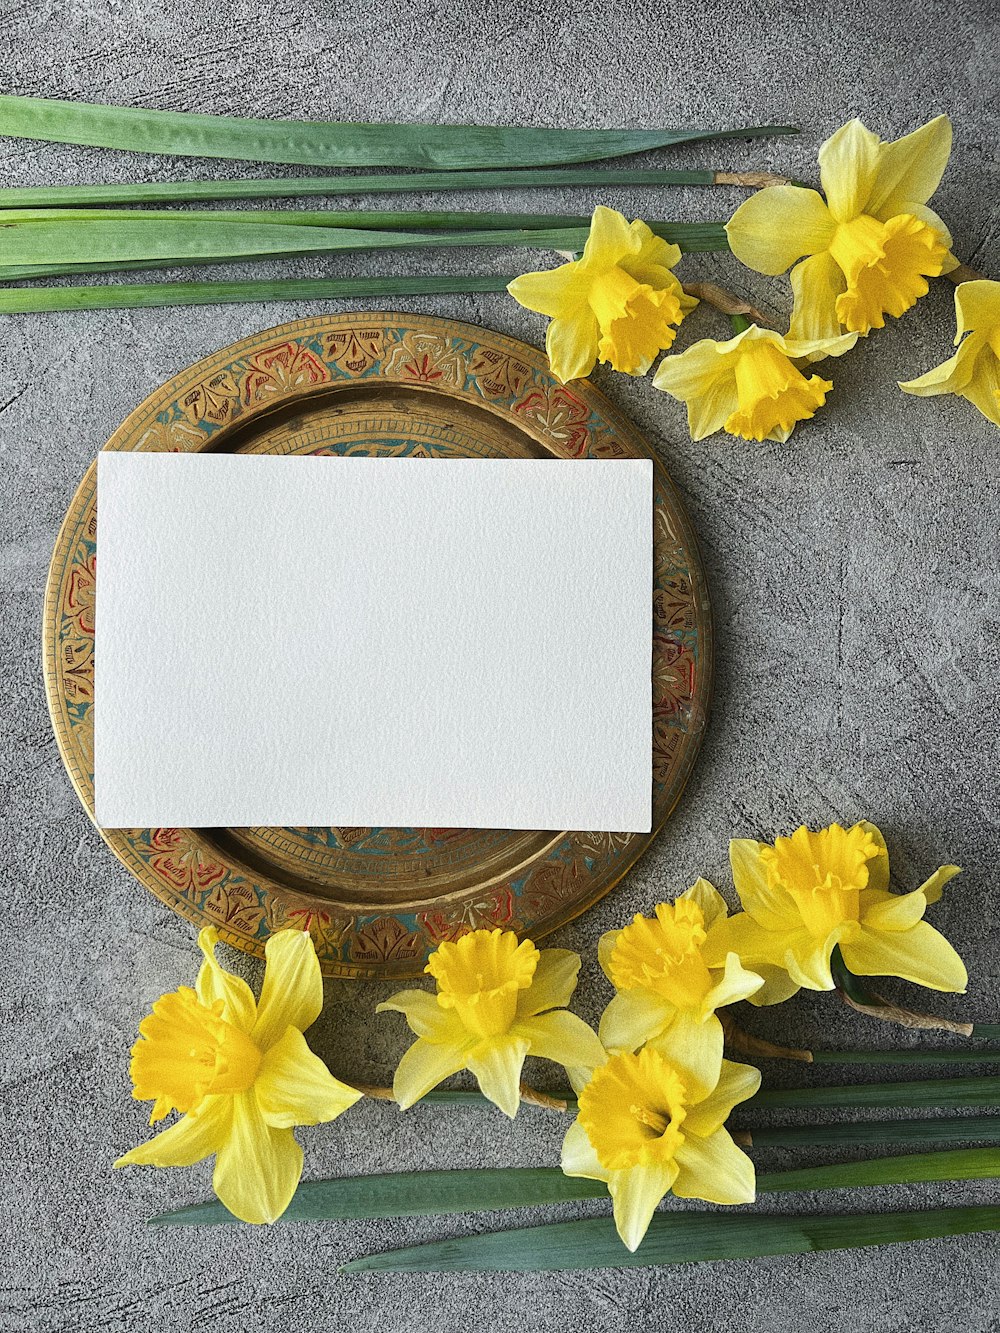 a plate with a blank card on it next to yellow flowers